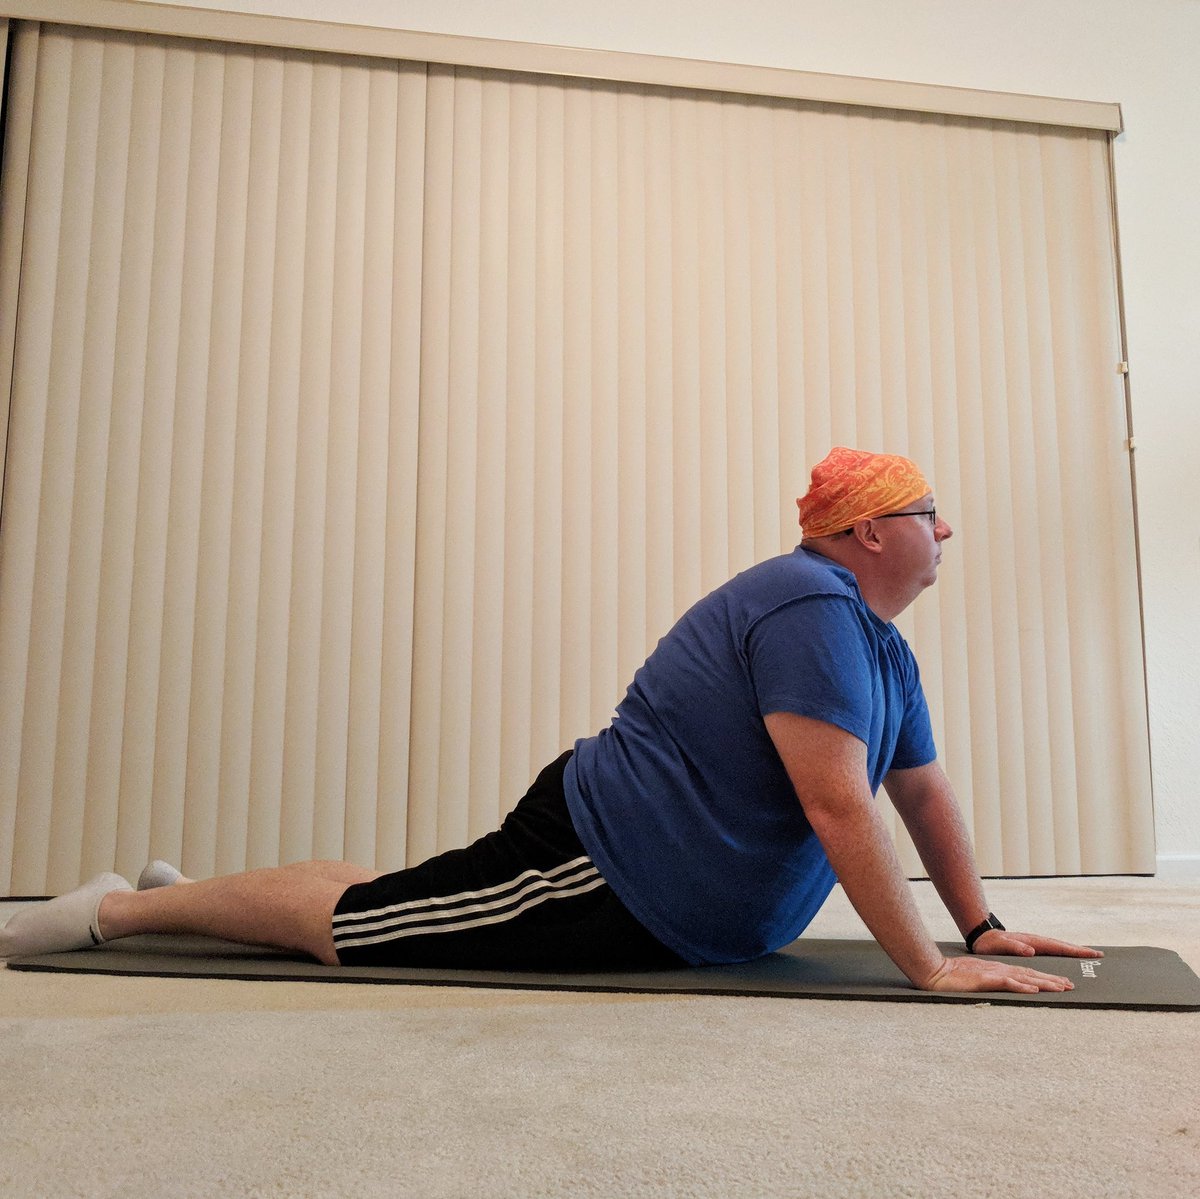 And up! Trying to bend more and #LiveMoreNow. I love working out with my @buff_usa headware. No sweat worries, face clear.

#BUFFBR #LiveMoreNow #BibChat #Ad #bibravepro